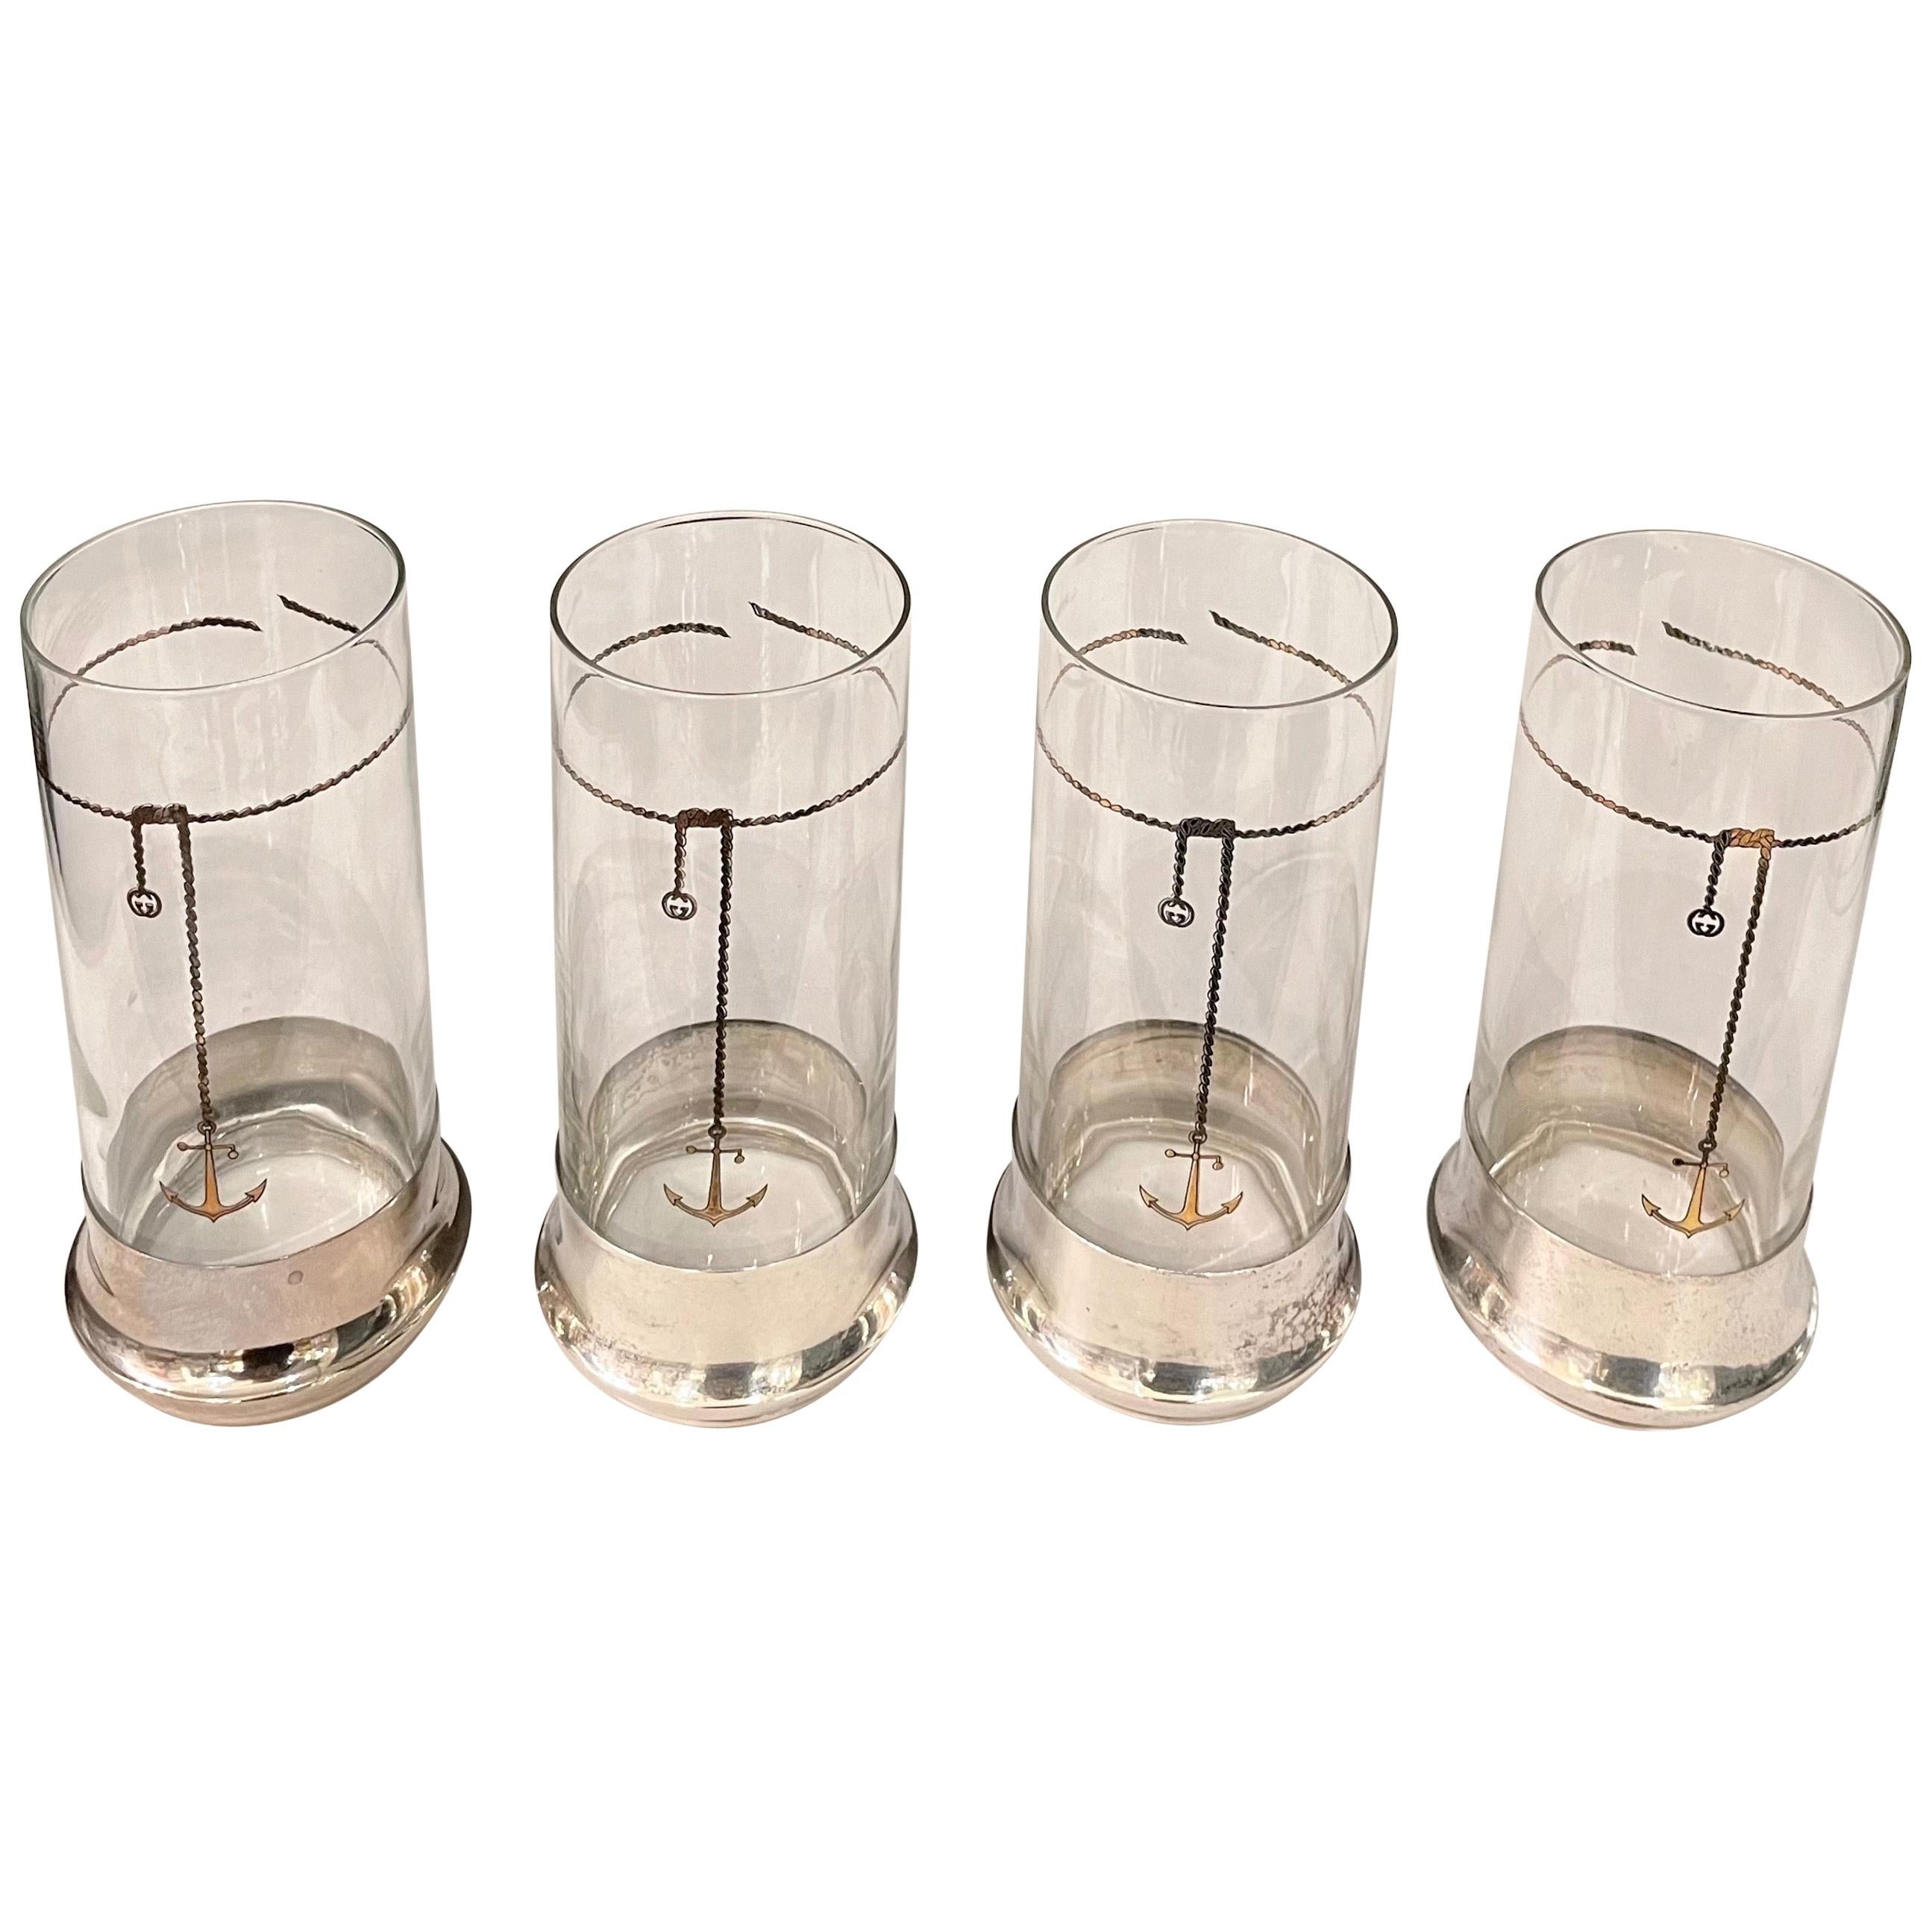 Vintage Gucci Highball Glassware w/ Silver Plate Bases, Set of Four '4'